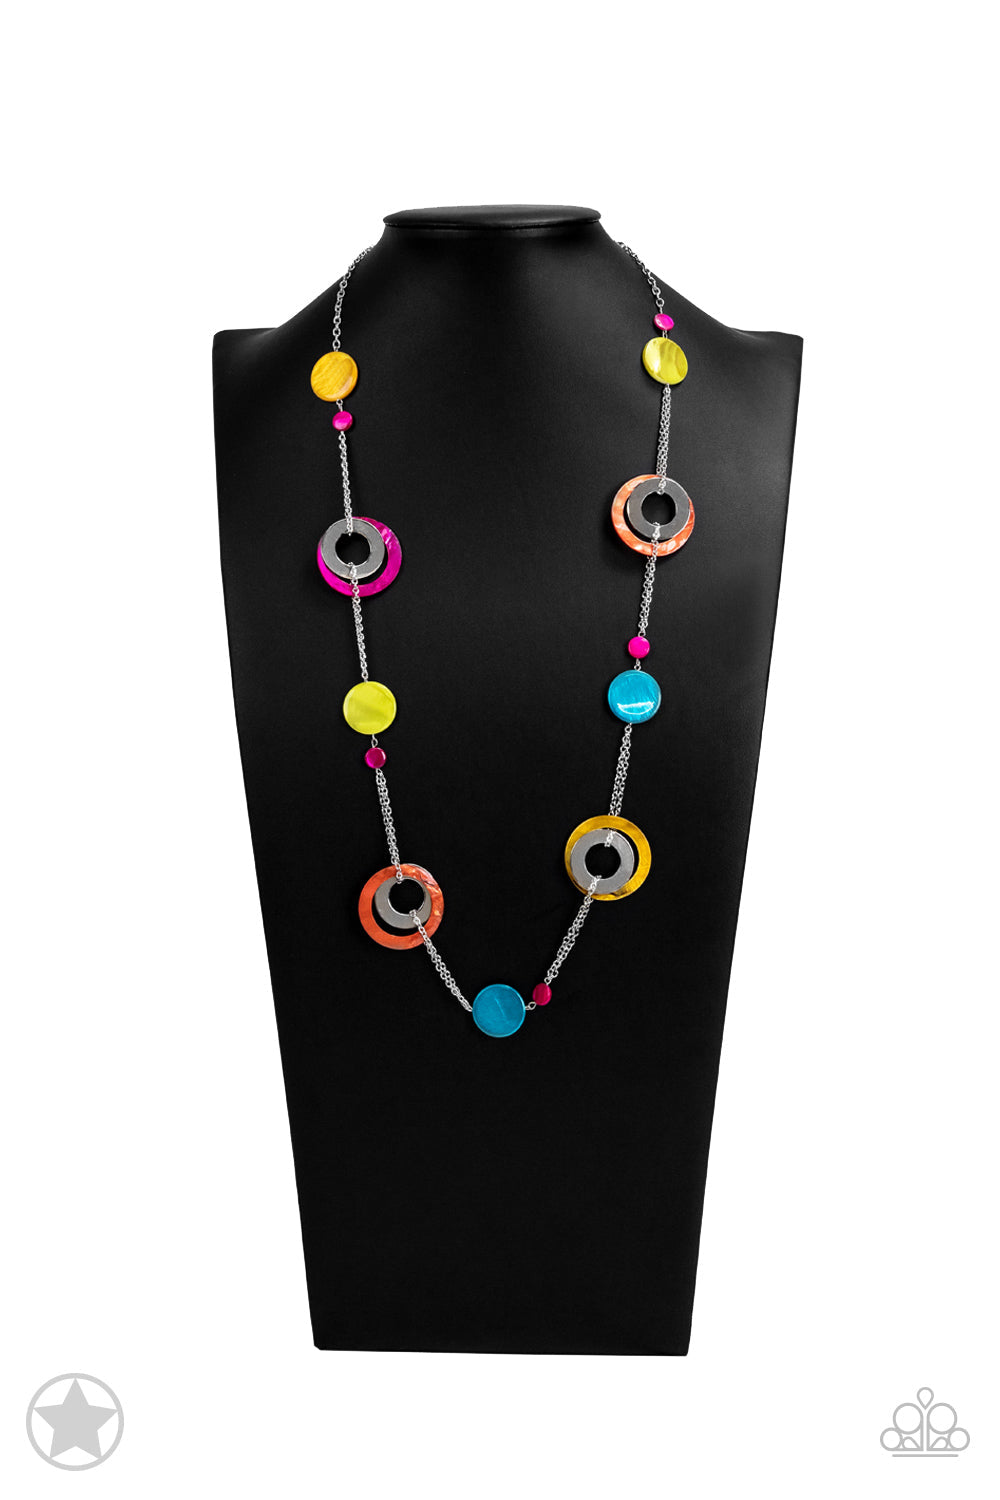 Kaleidoscopically Captivating - Colorful and Silver Necklace - Paparazzi Accessories - Trendy fashion jewelry for everyone - Casual and colorful fashion necklace. It has chunky brightly-colored rings and discs with swirly marble finishes join thick metal hoops to climb a simple silver chain and create a retro style.